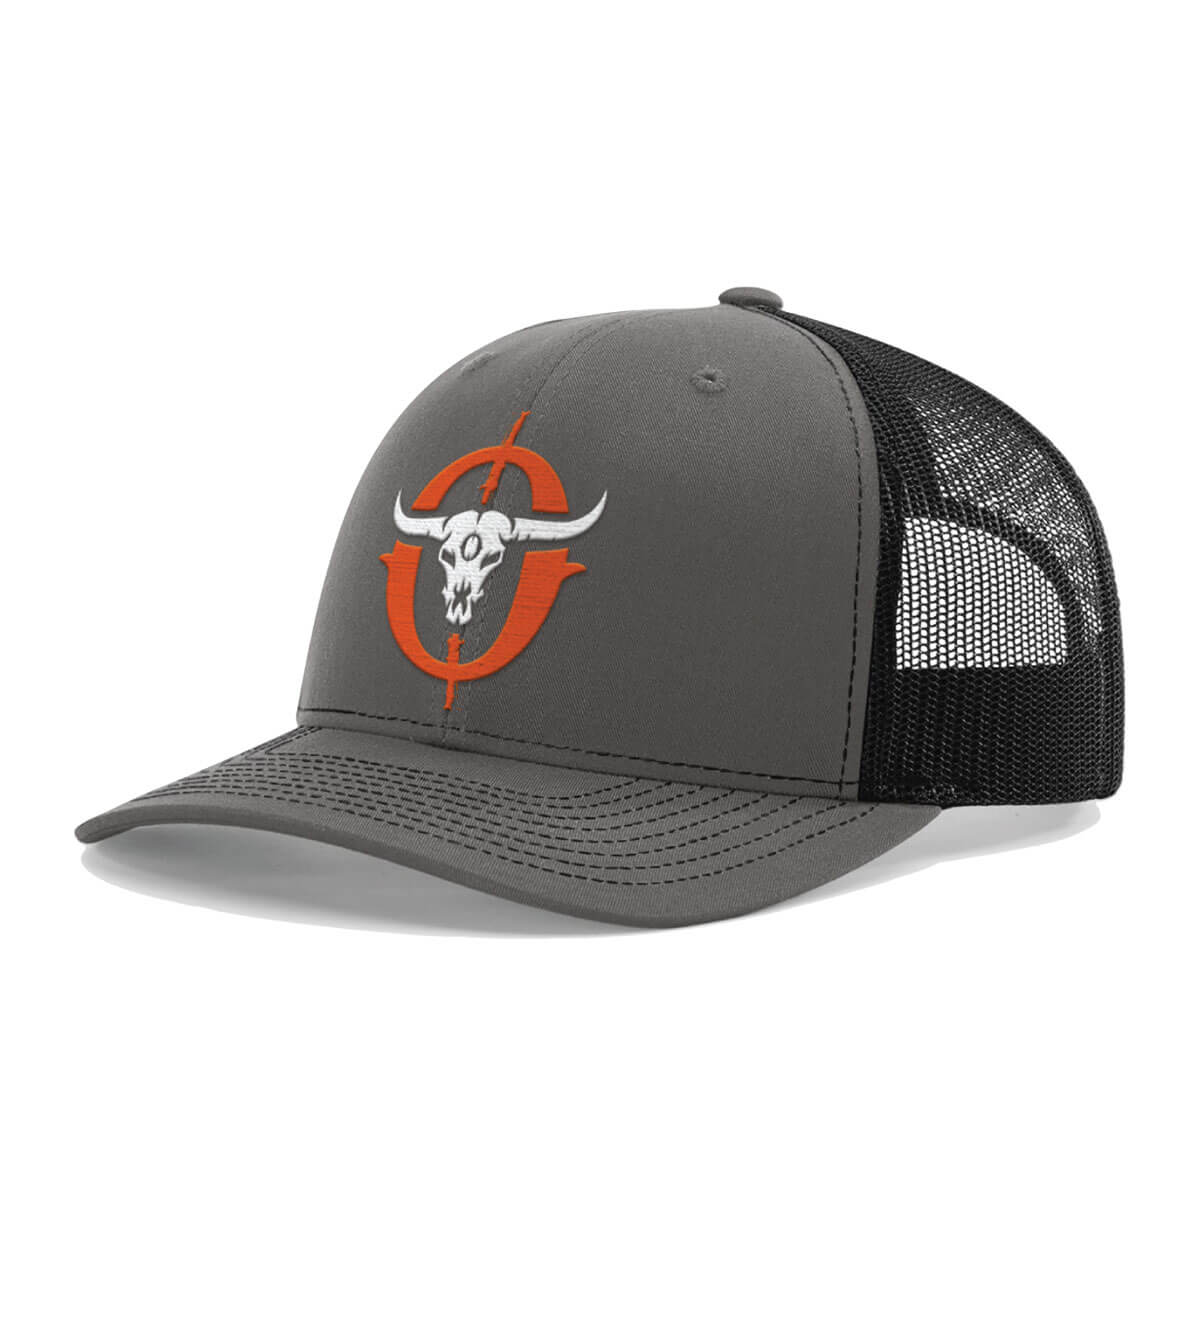 Front view of the Outlaws Alternate Logo - 112+ R-Flex Adjustable Trucker Cap